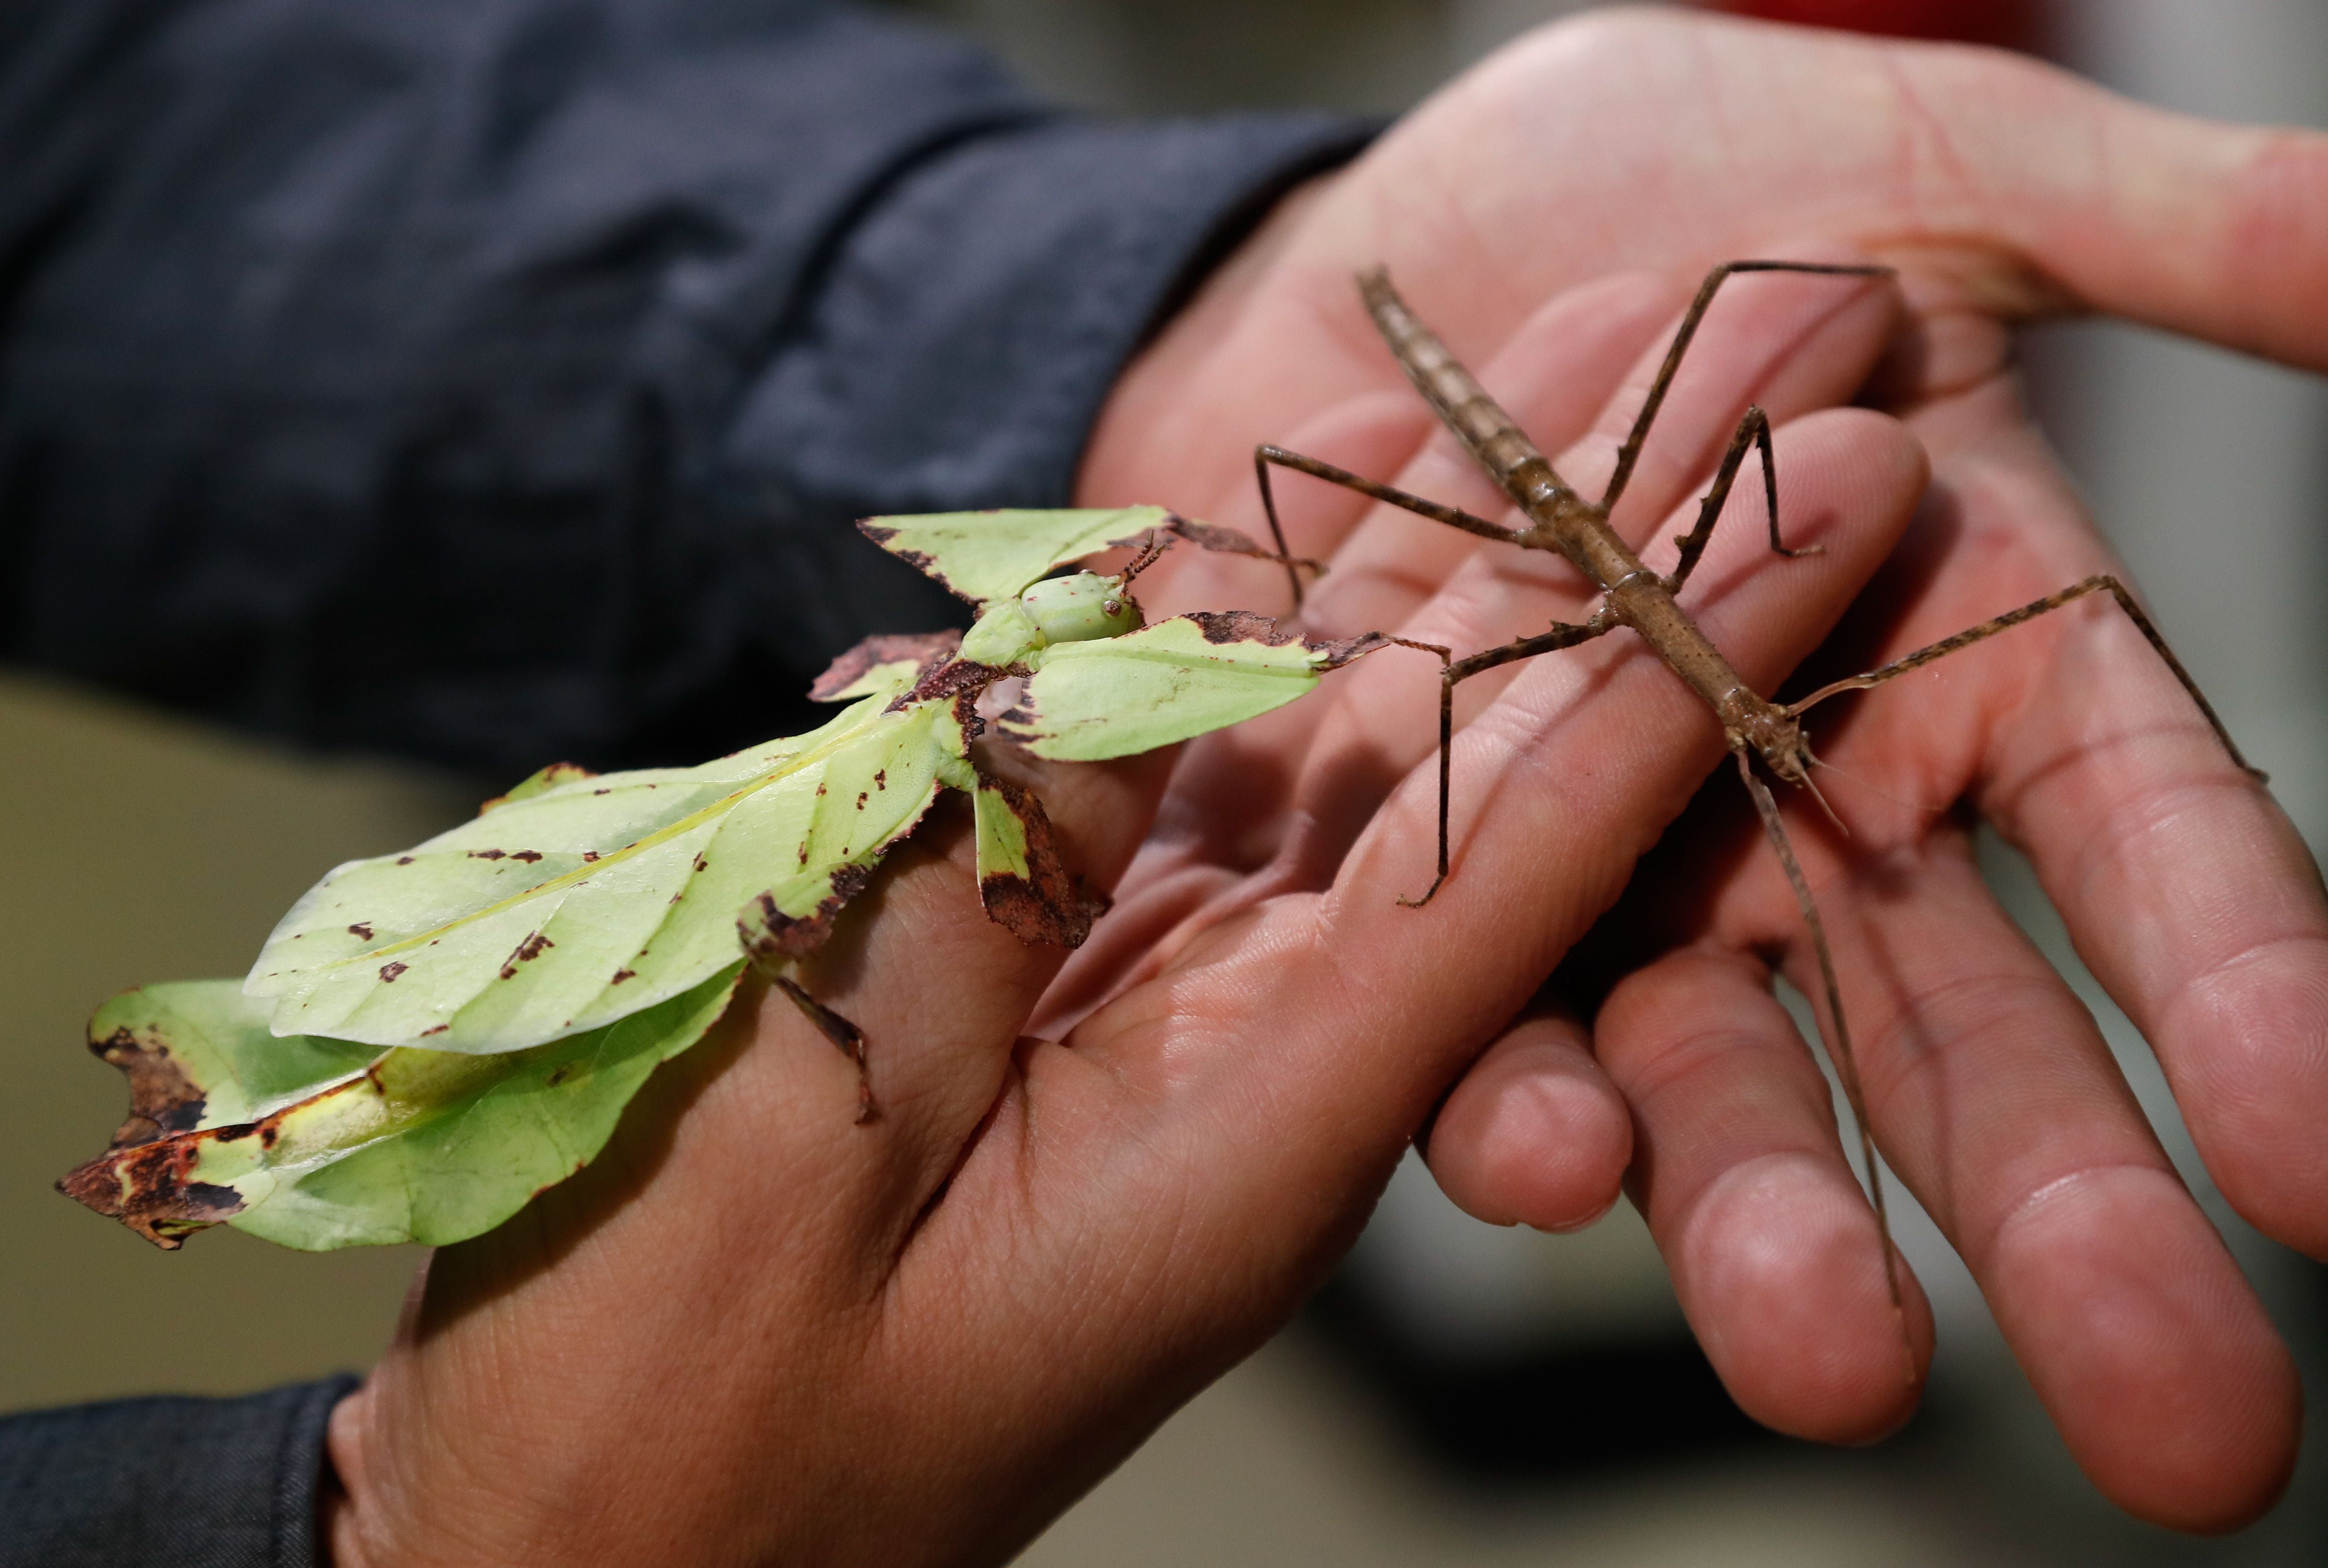 Two species of Phasmatodea in Paris in 2018. (Photo: FRANCOIS GUILLOT/AFP, Getty Images)